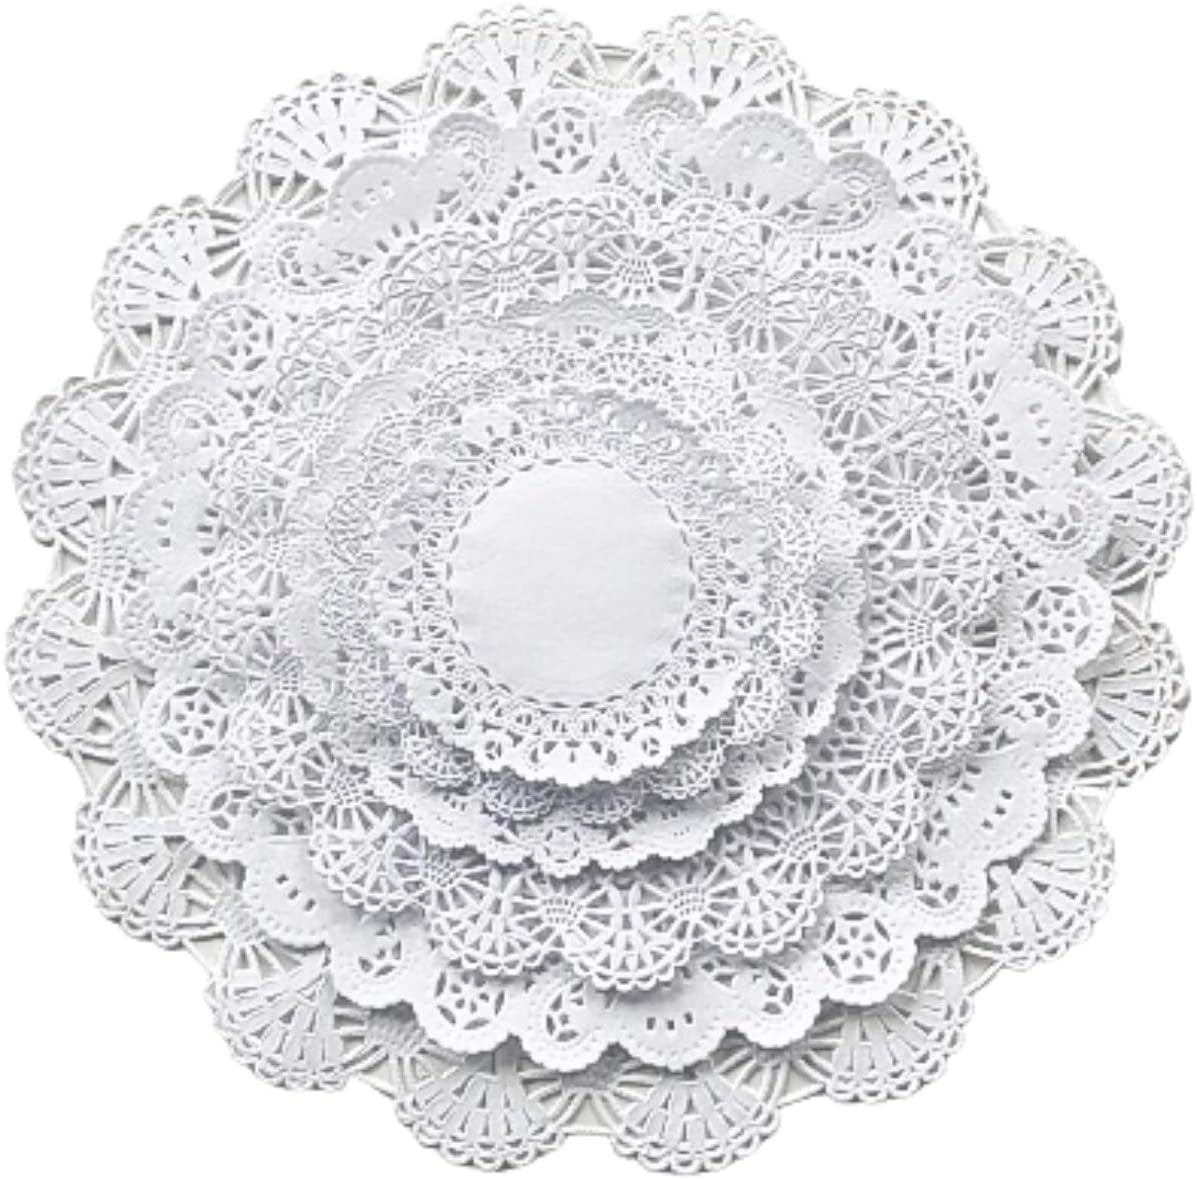 White Round 9 inches Paper Lace Doilies by The Baker Celebrations; Made in Canada 50 